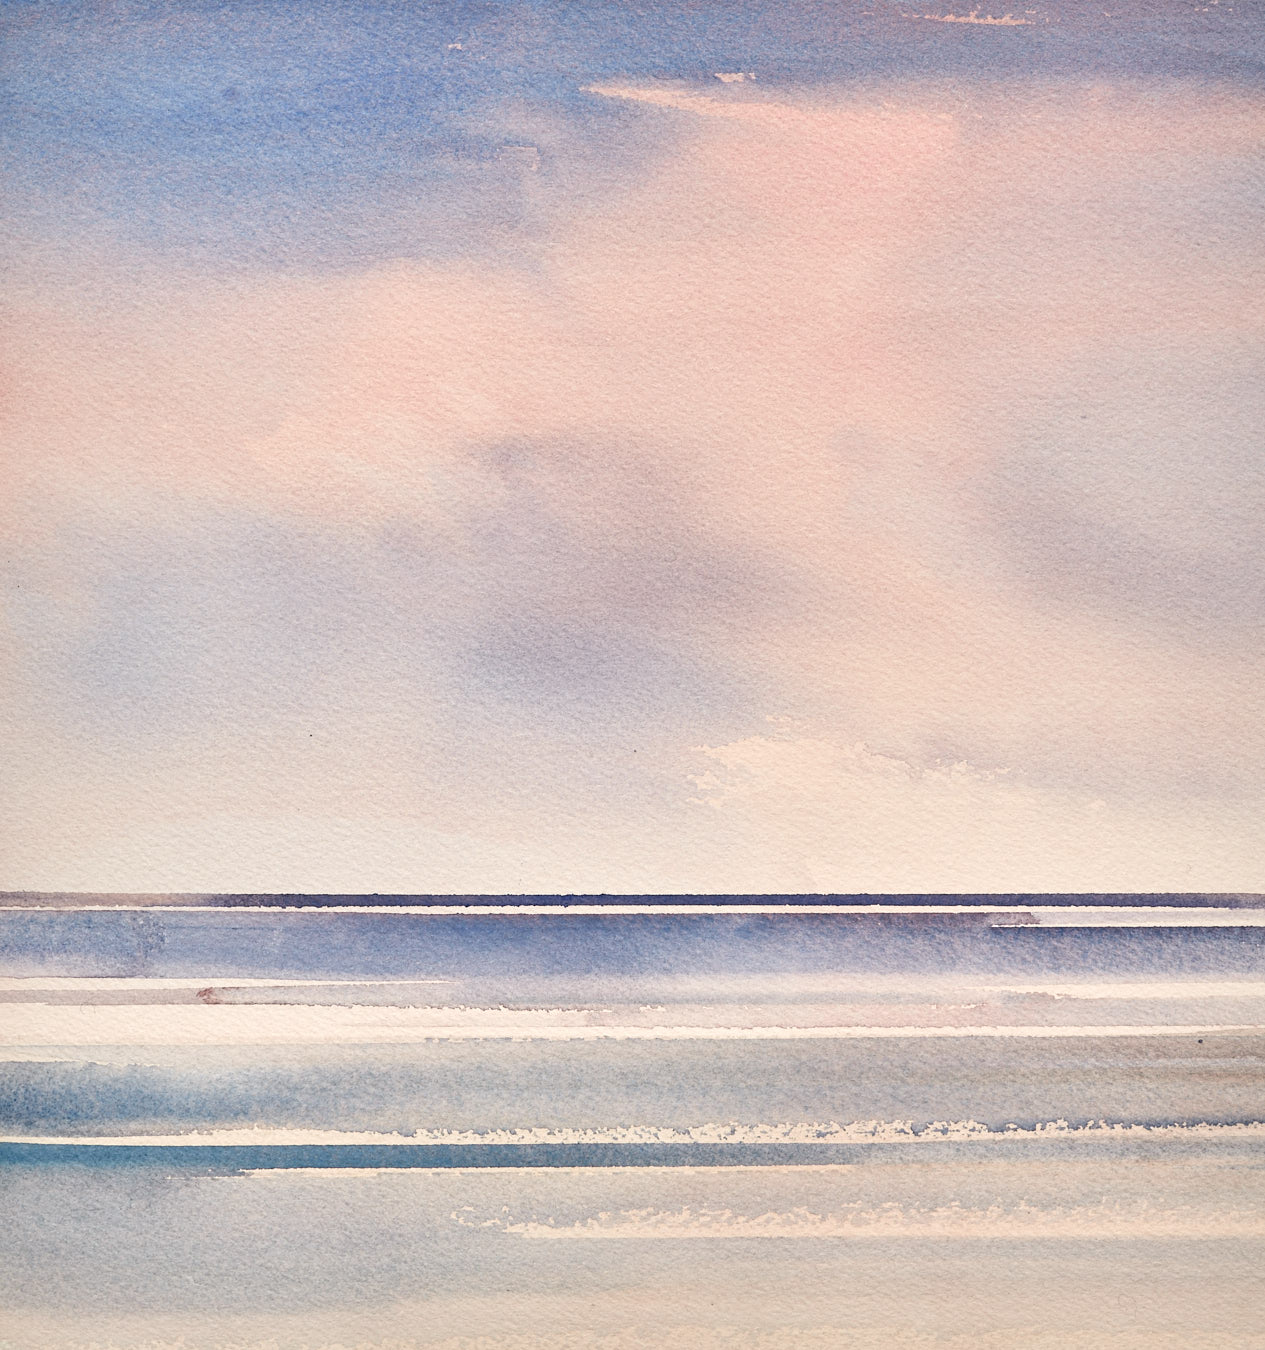 Large image of Twilight beach original watercolour painting by Timothy Gent